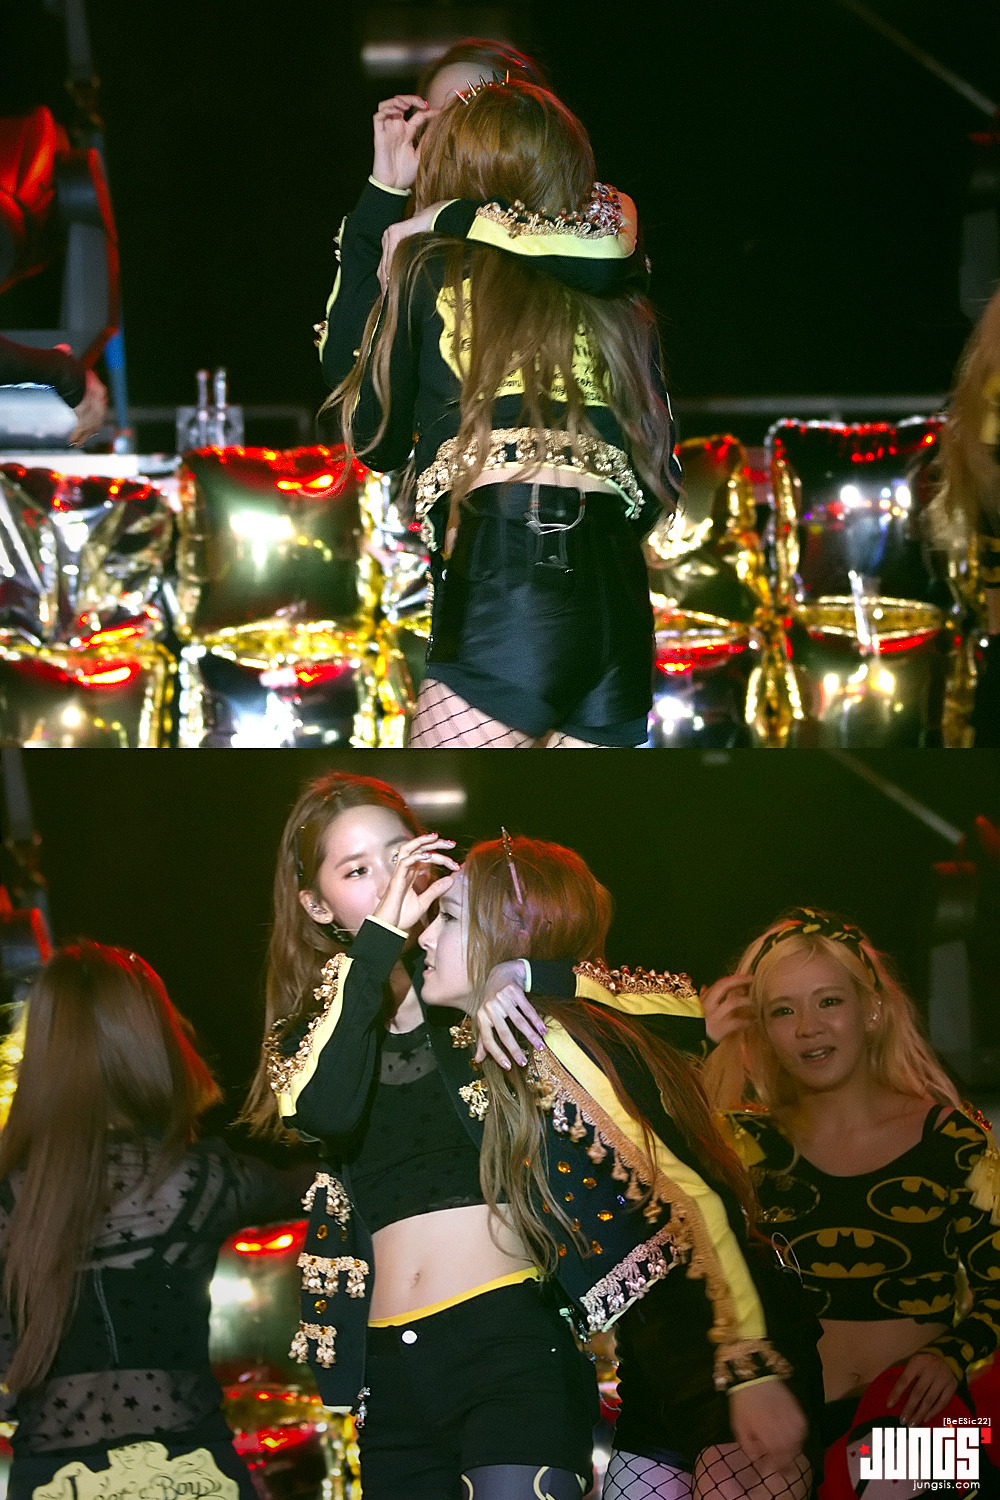 YoonSic 2013/03/30@Super Joint Concert